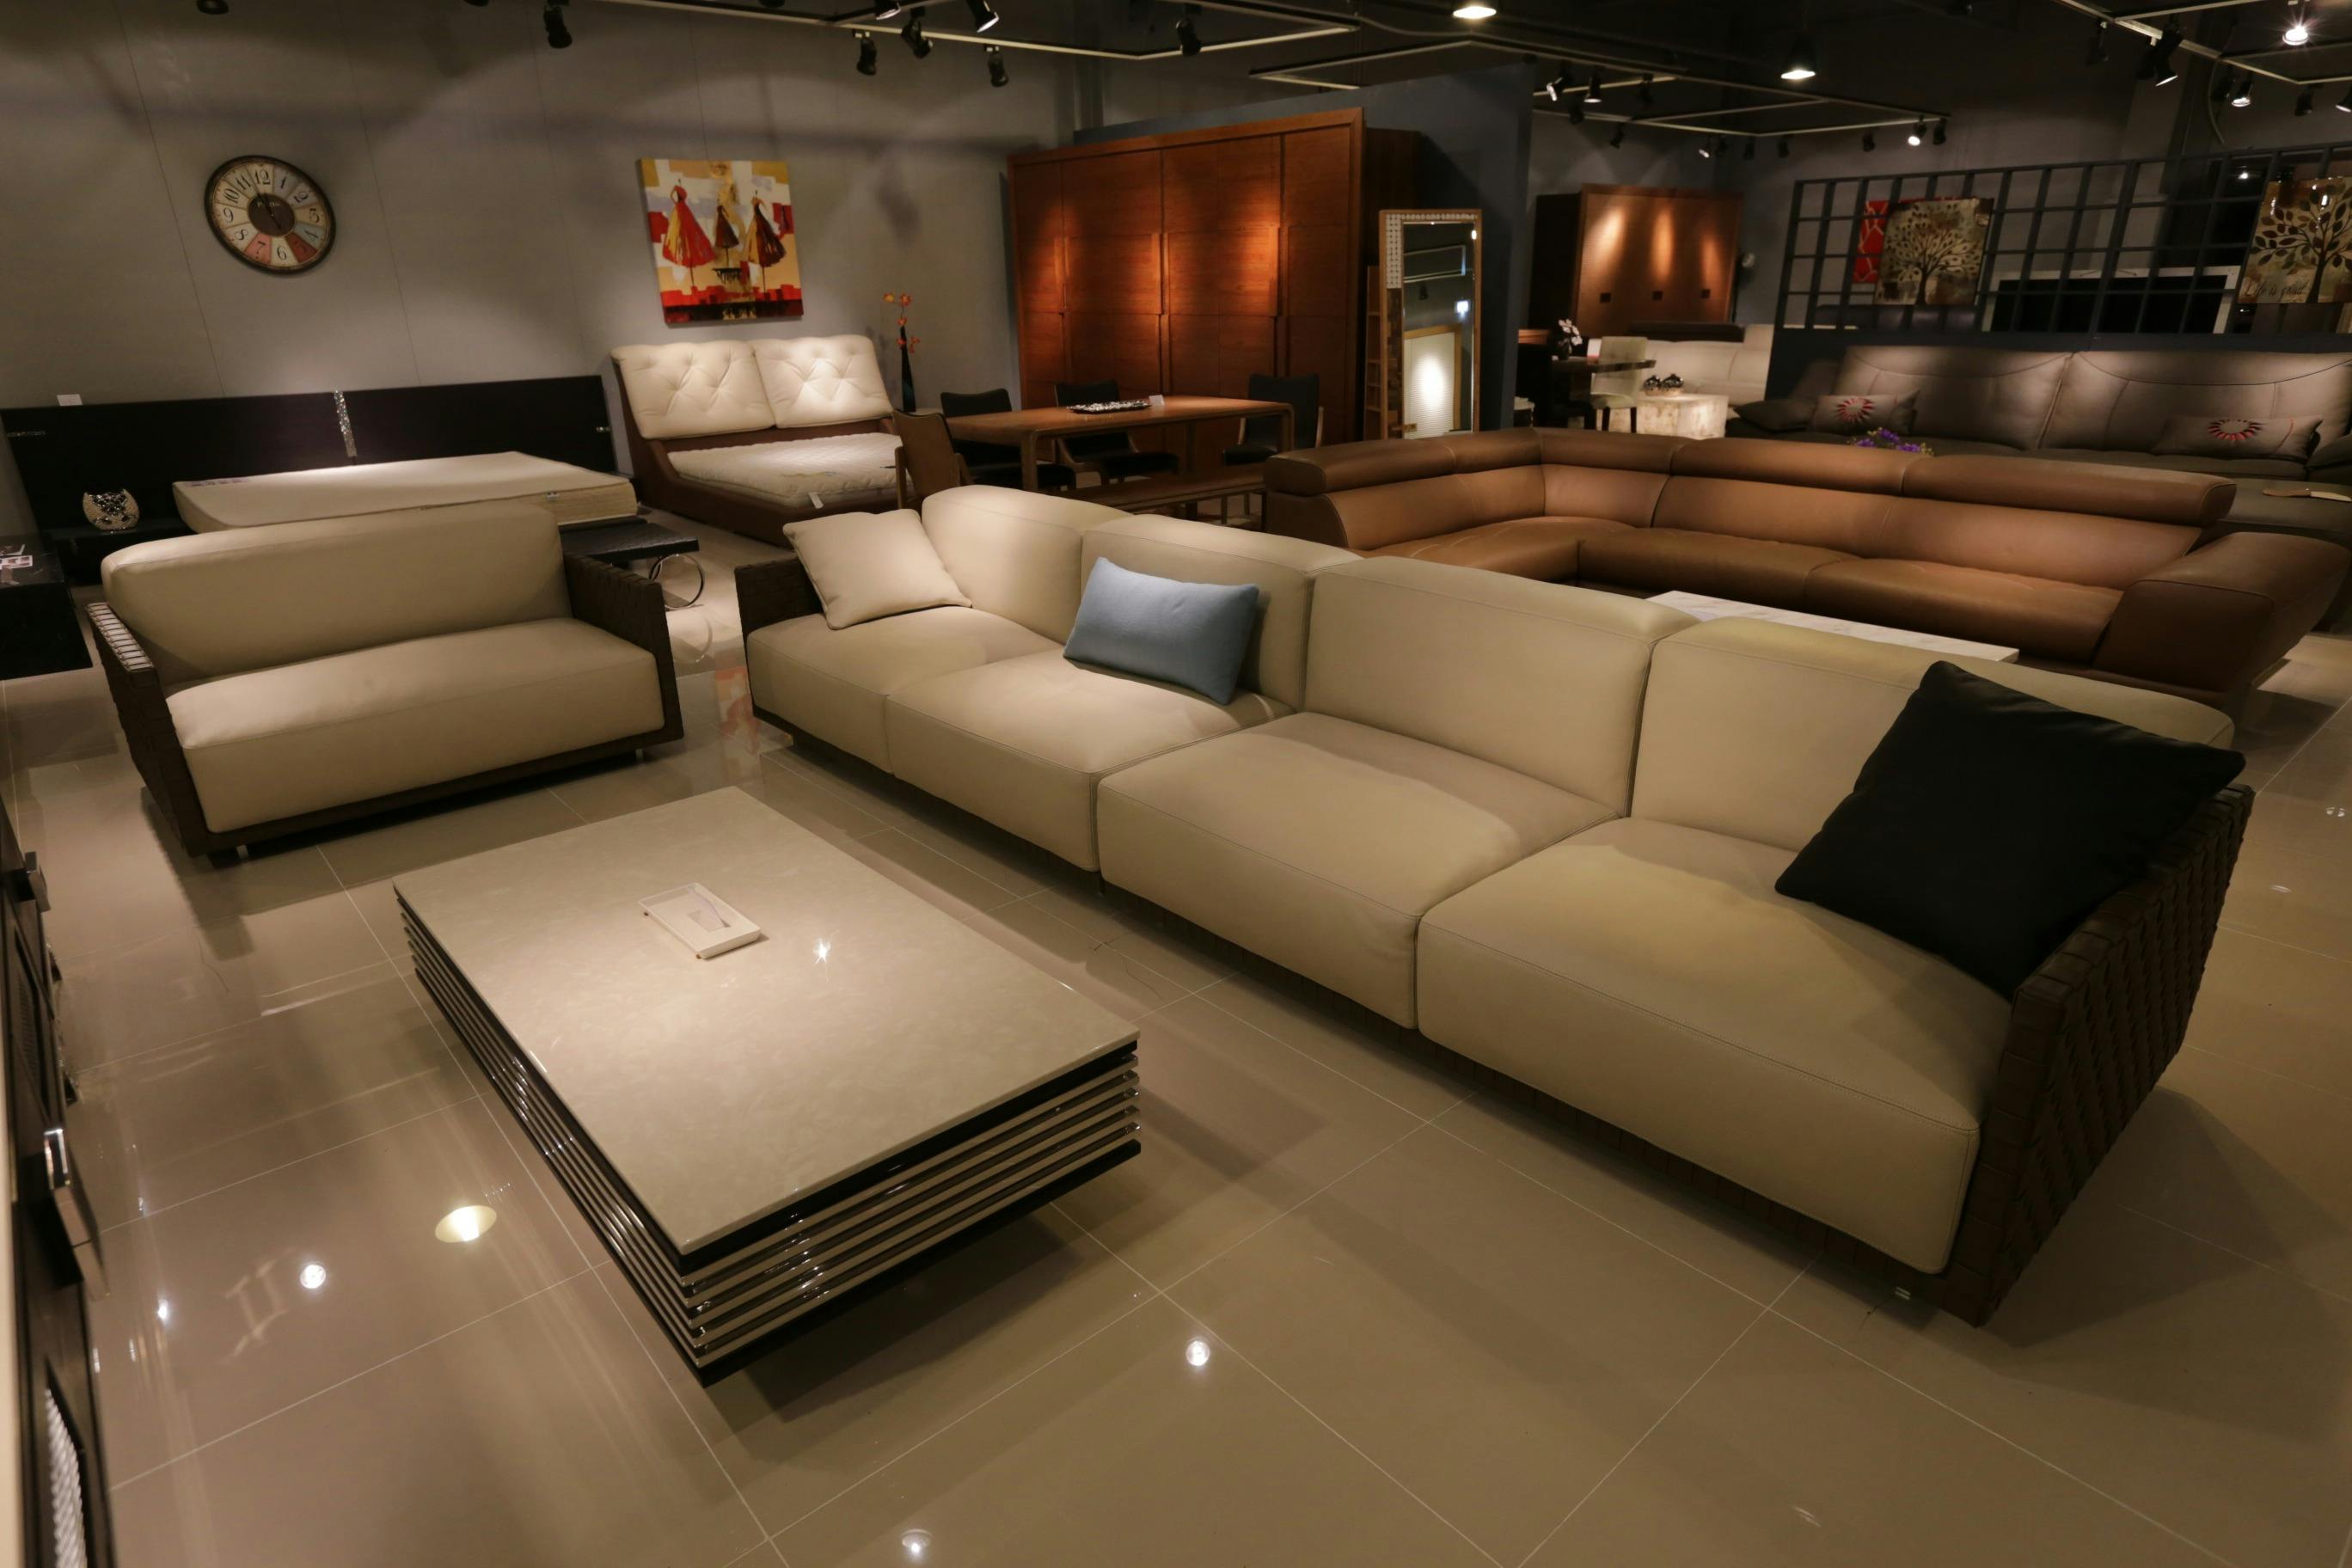 A Step-by-Step Guide To Purchasing A New Sofa